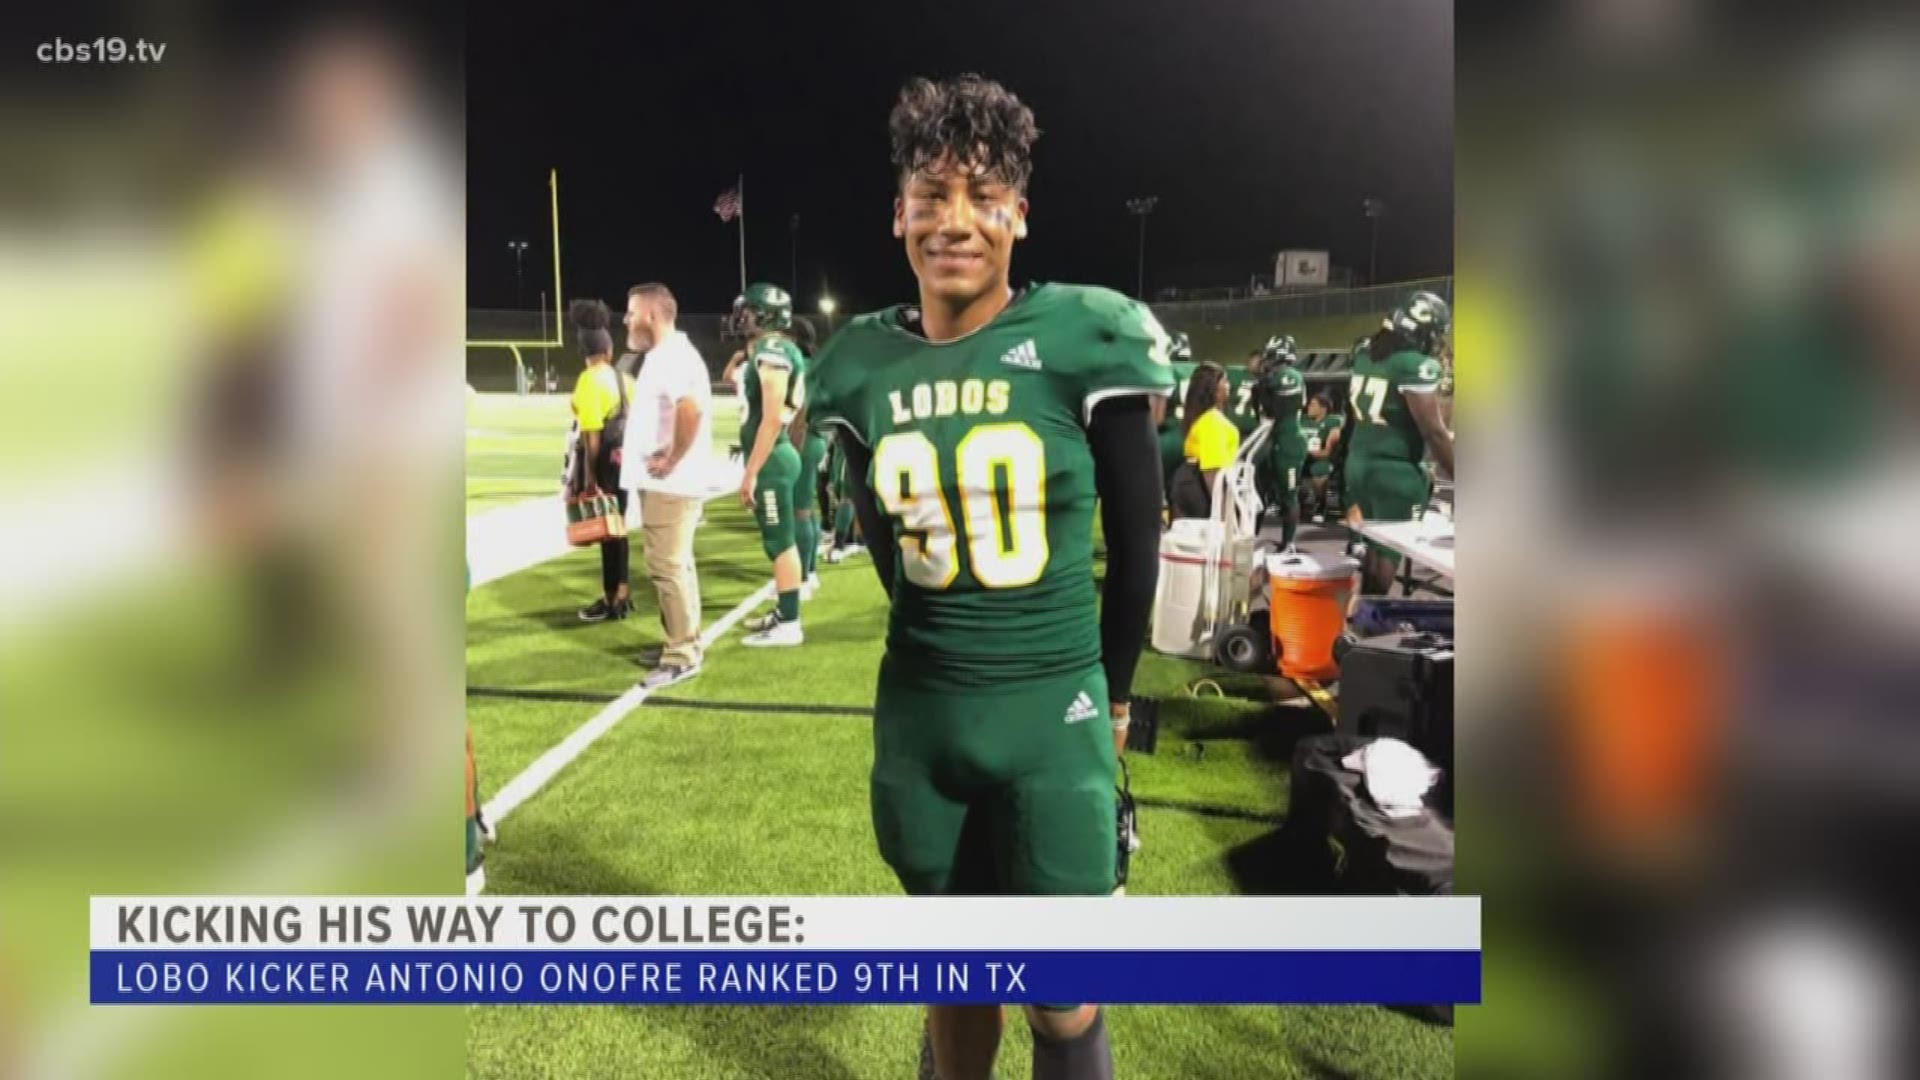 Antonio Onofre is already a 4 and a half star kicking recruit, but at 9th ranked in Texas he believes he can do better.